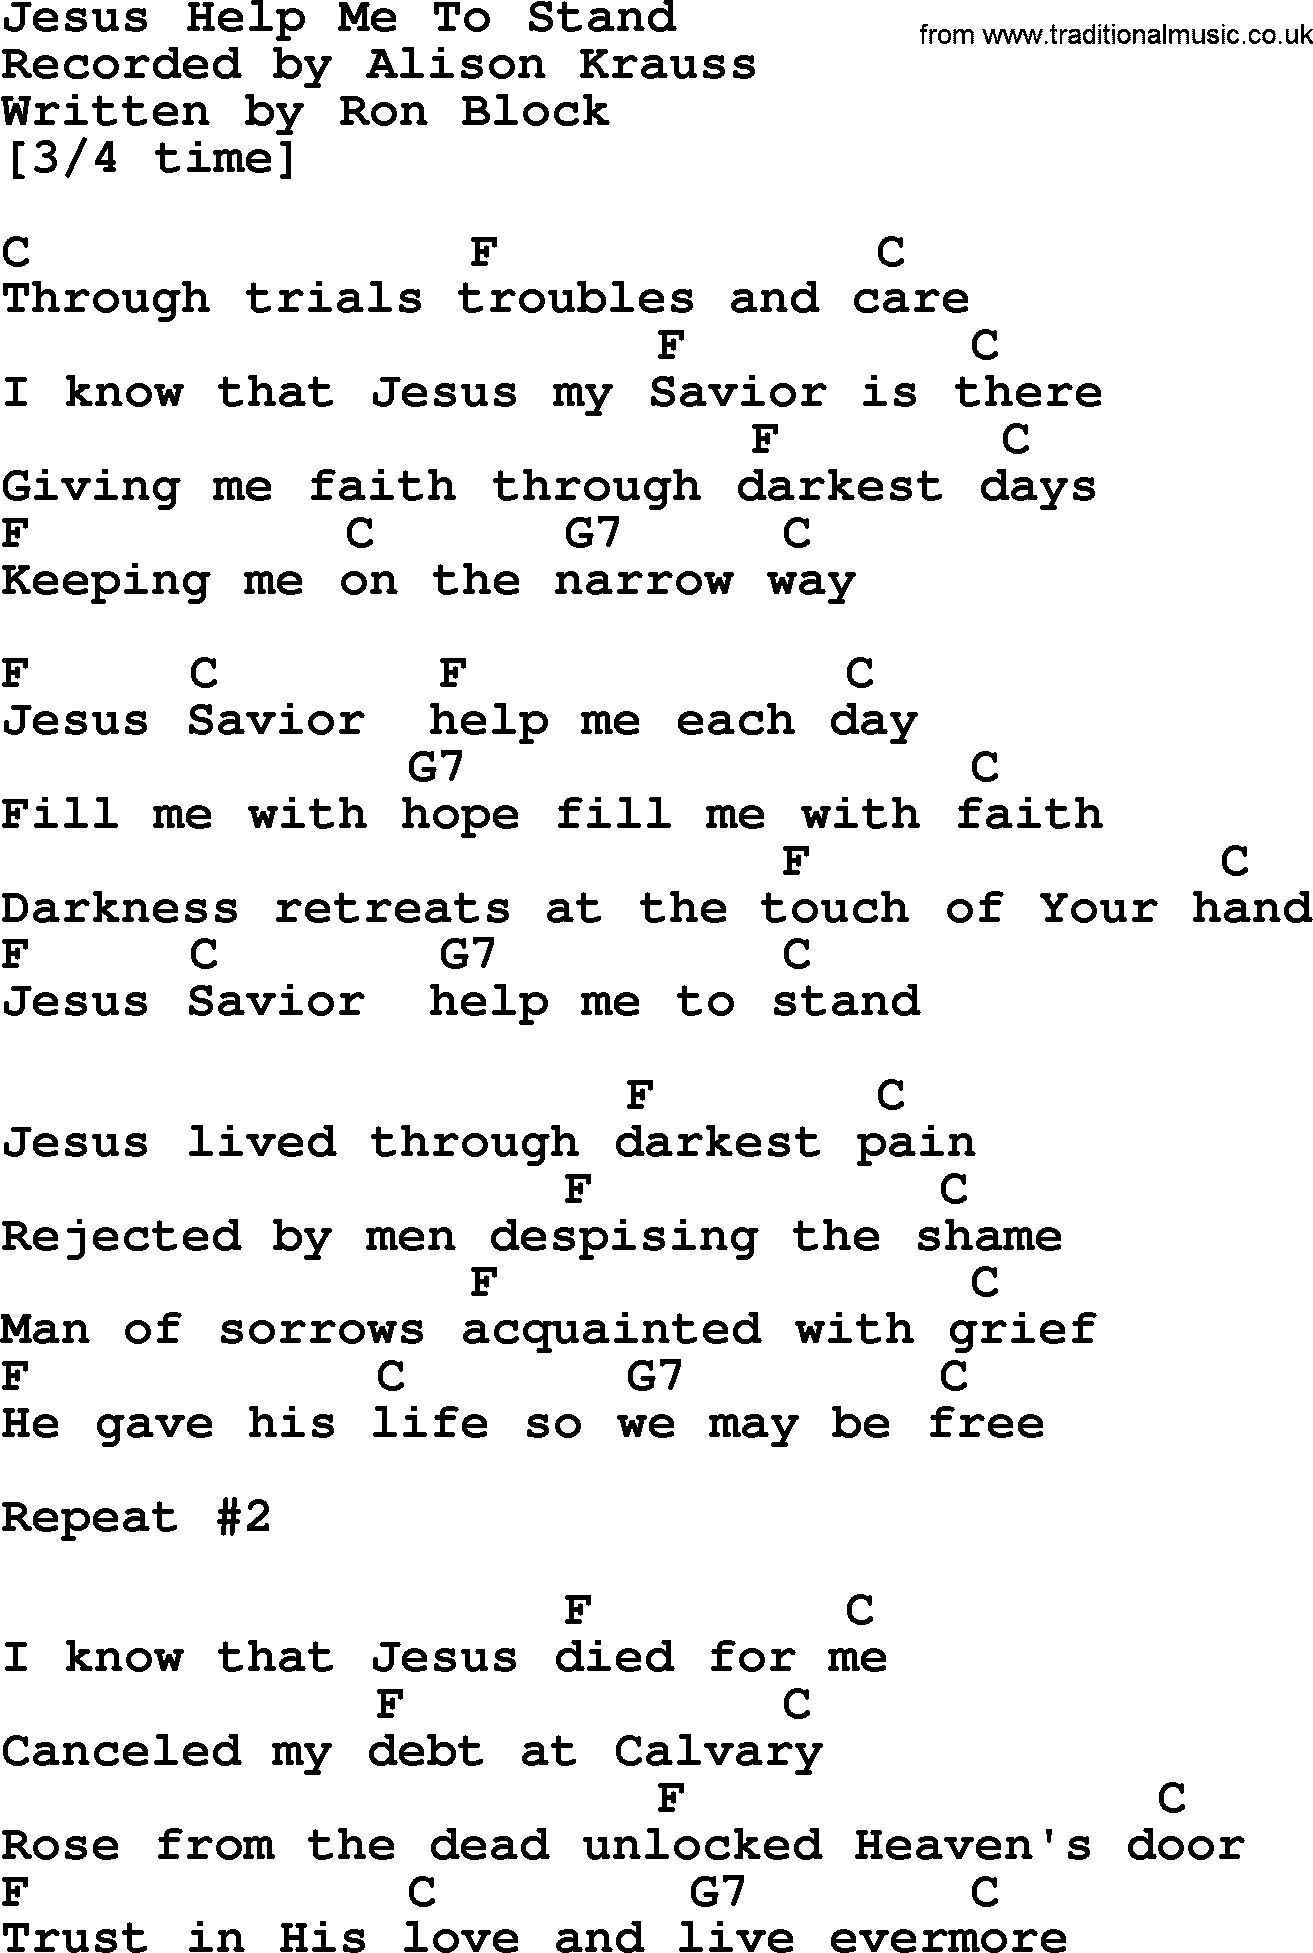 Bluegrass song: Jesus Help Me To Stand, lyrics and chords